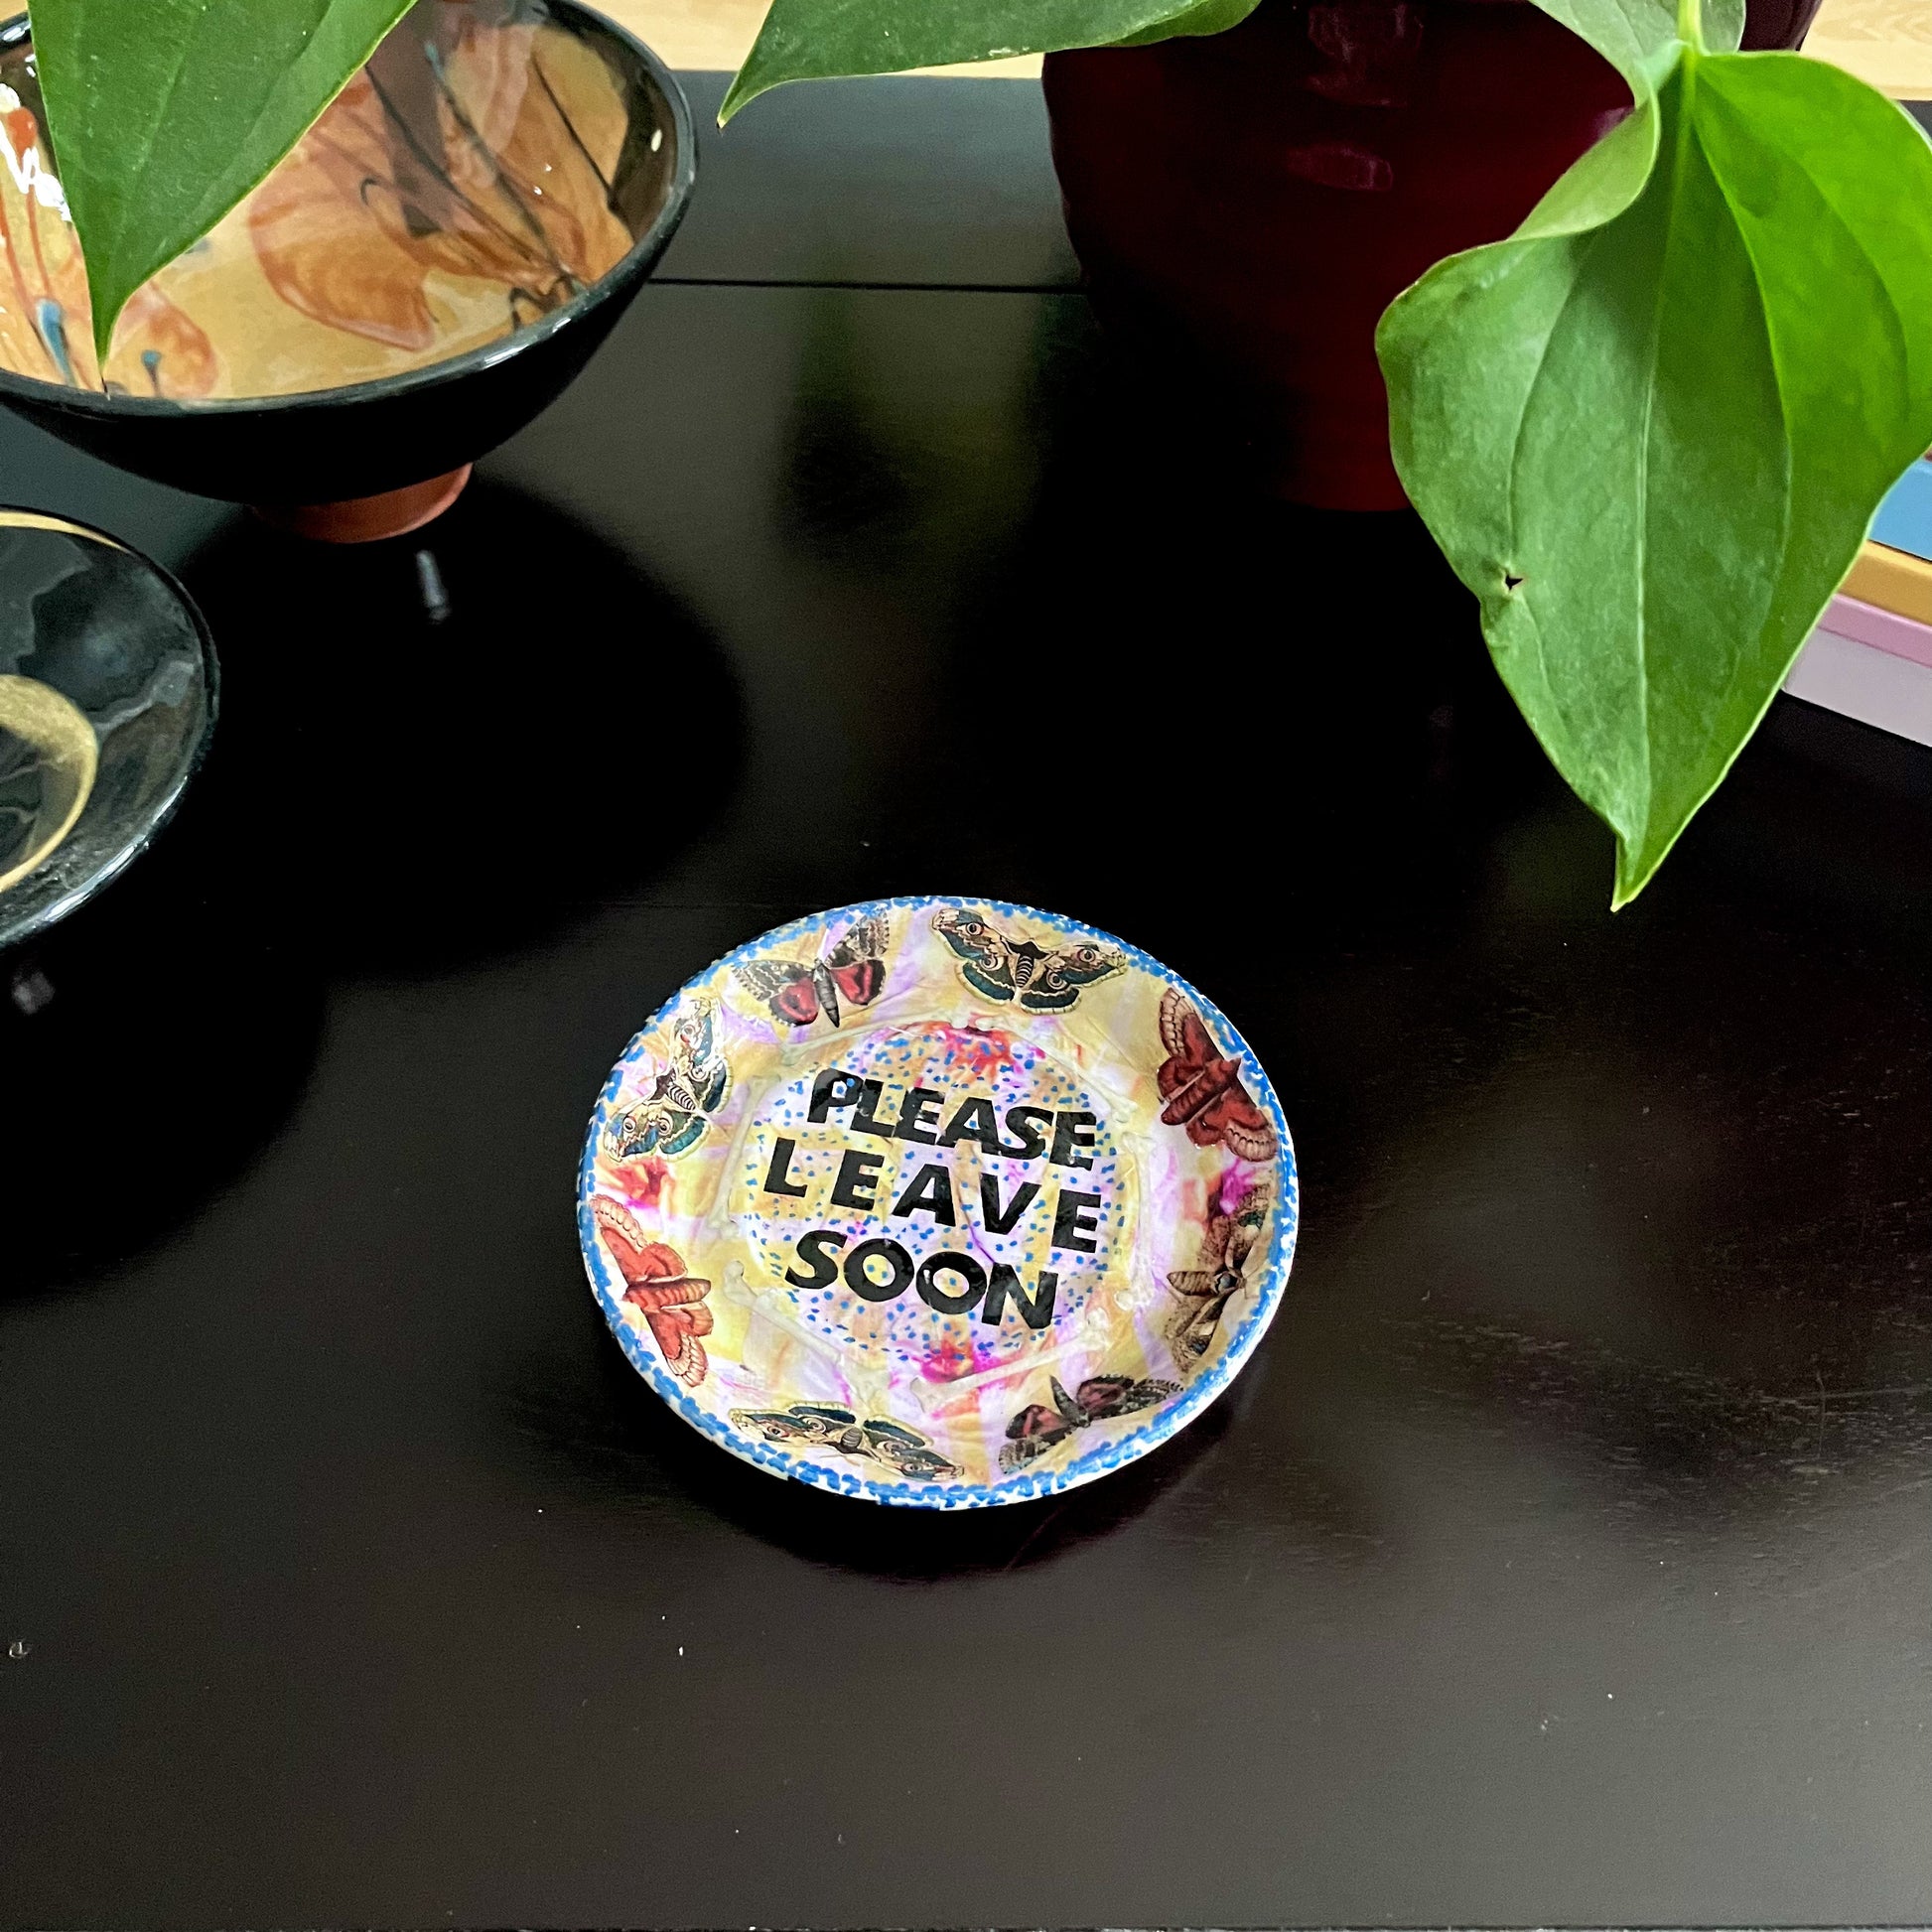 "Please Leave Soon" Trinket Dish by House of Frisson. Featuring some moths and the words "please leave soon", on yellow and pink background. Dish on a coffee table.